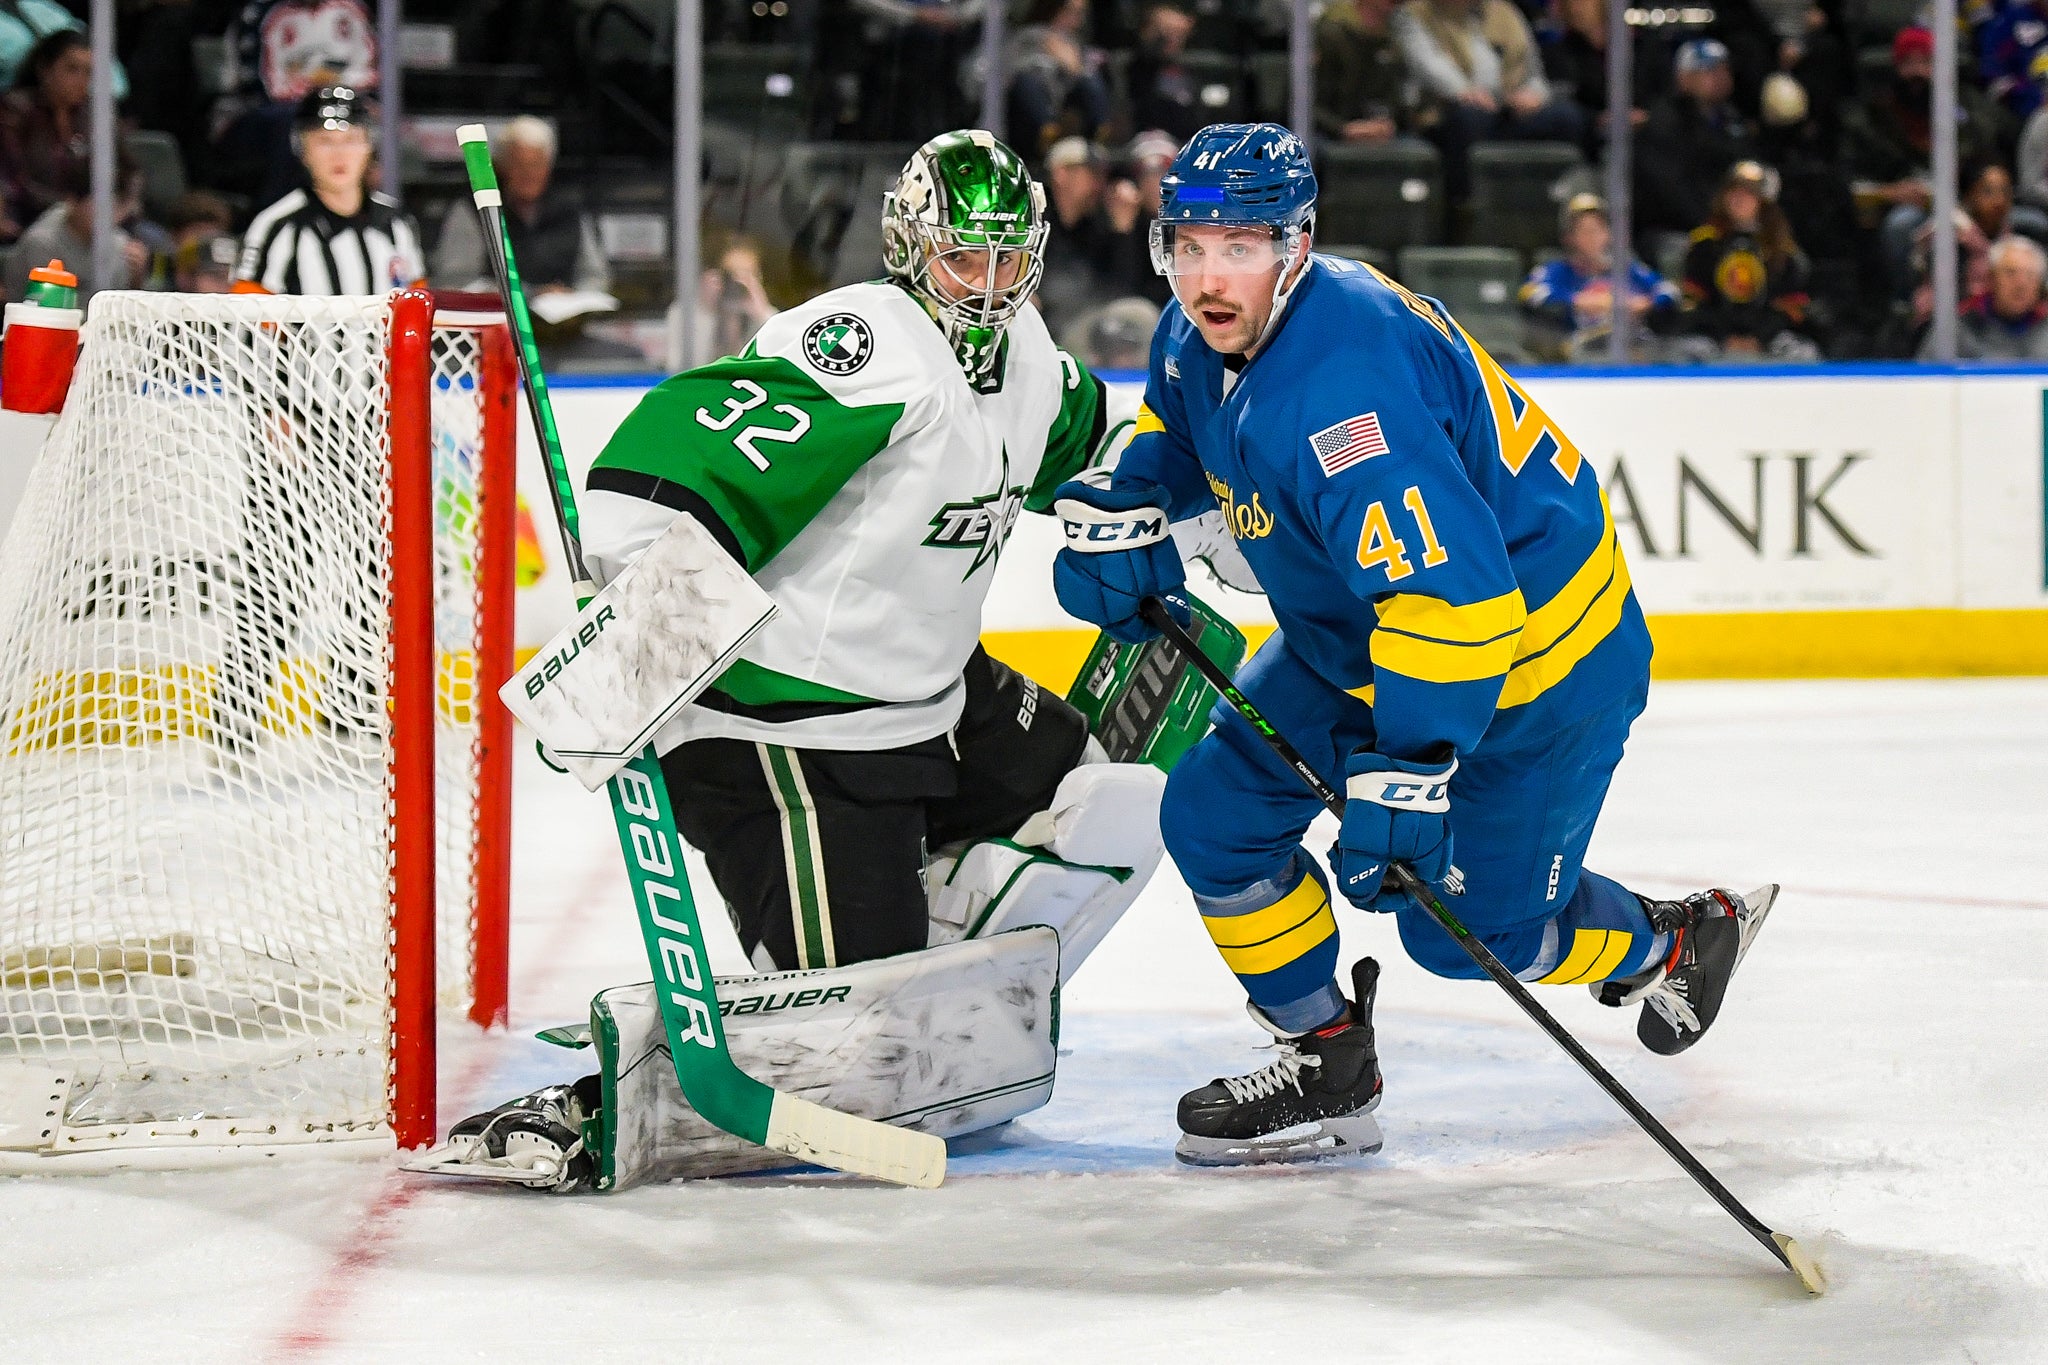 Stars Fall 2-1 in First Meeting of the Season to Colorado